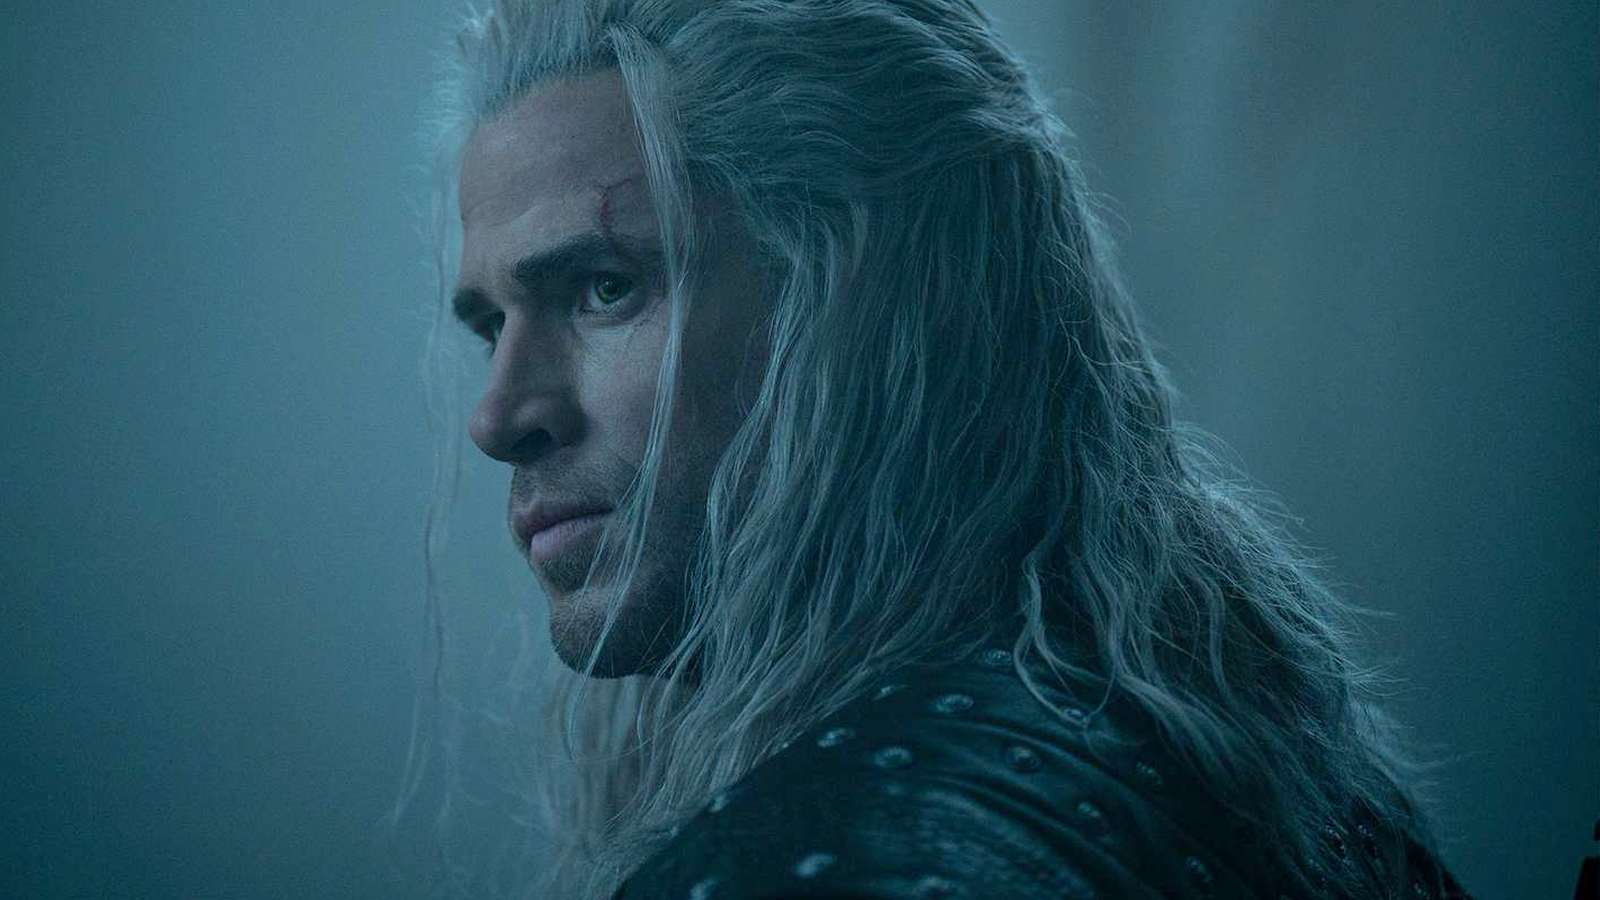 Liam Hemsworth as Geralt of Rivia in The Witcher Season 4